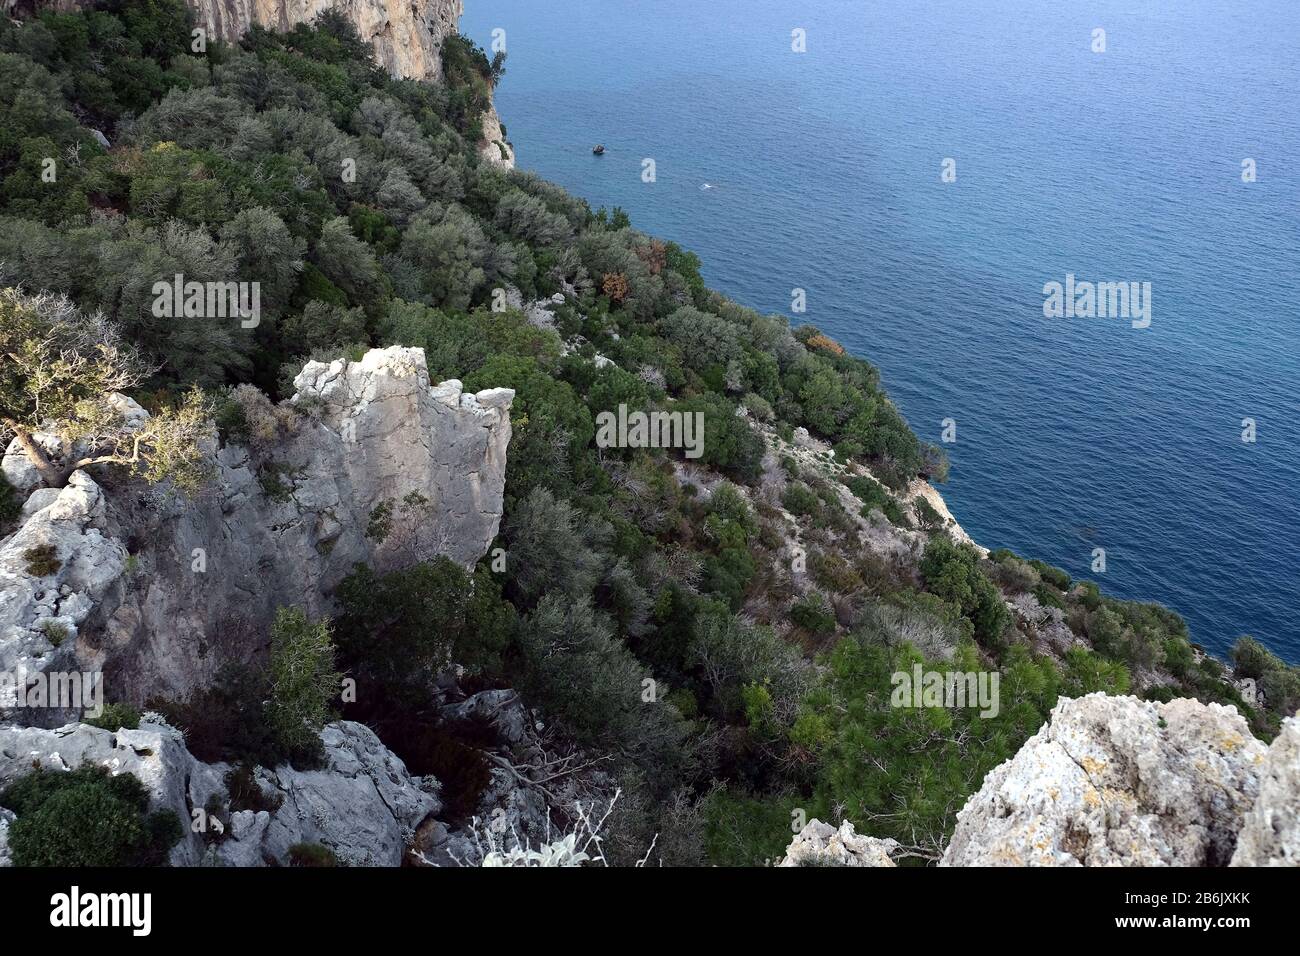 Landscape with high mountains covered with dense southern vegetation and wonderful clean turquoise water Mediterranean sea far below Stock Photo